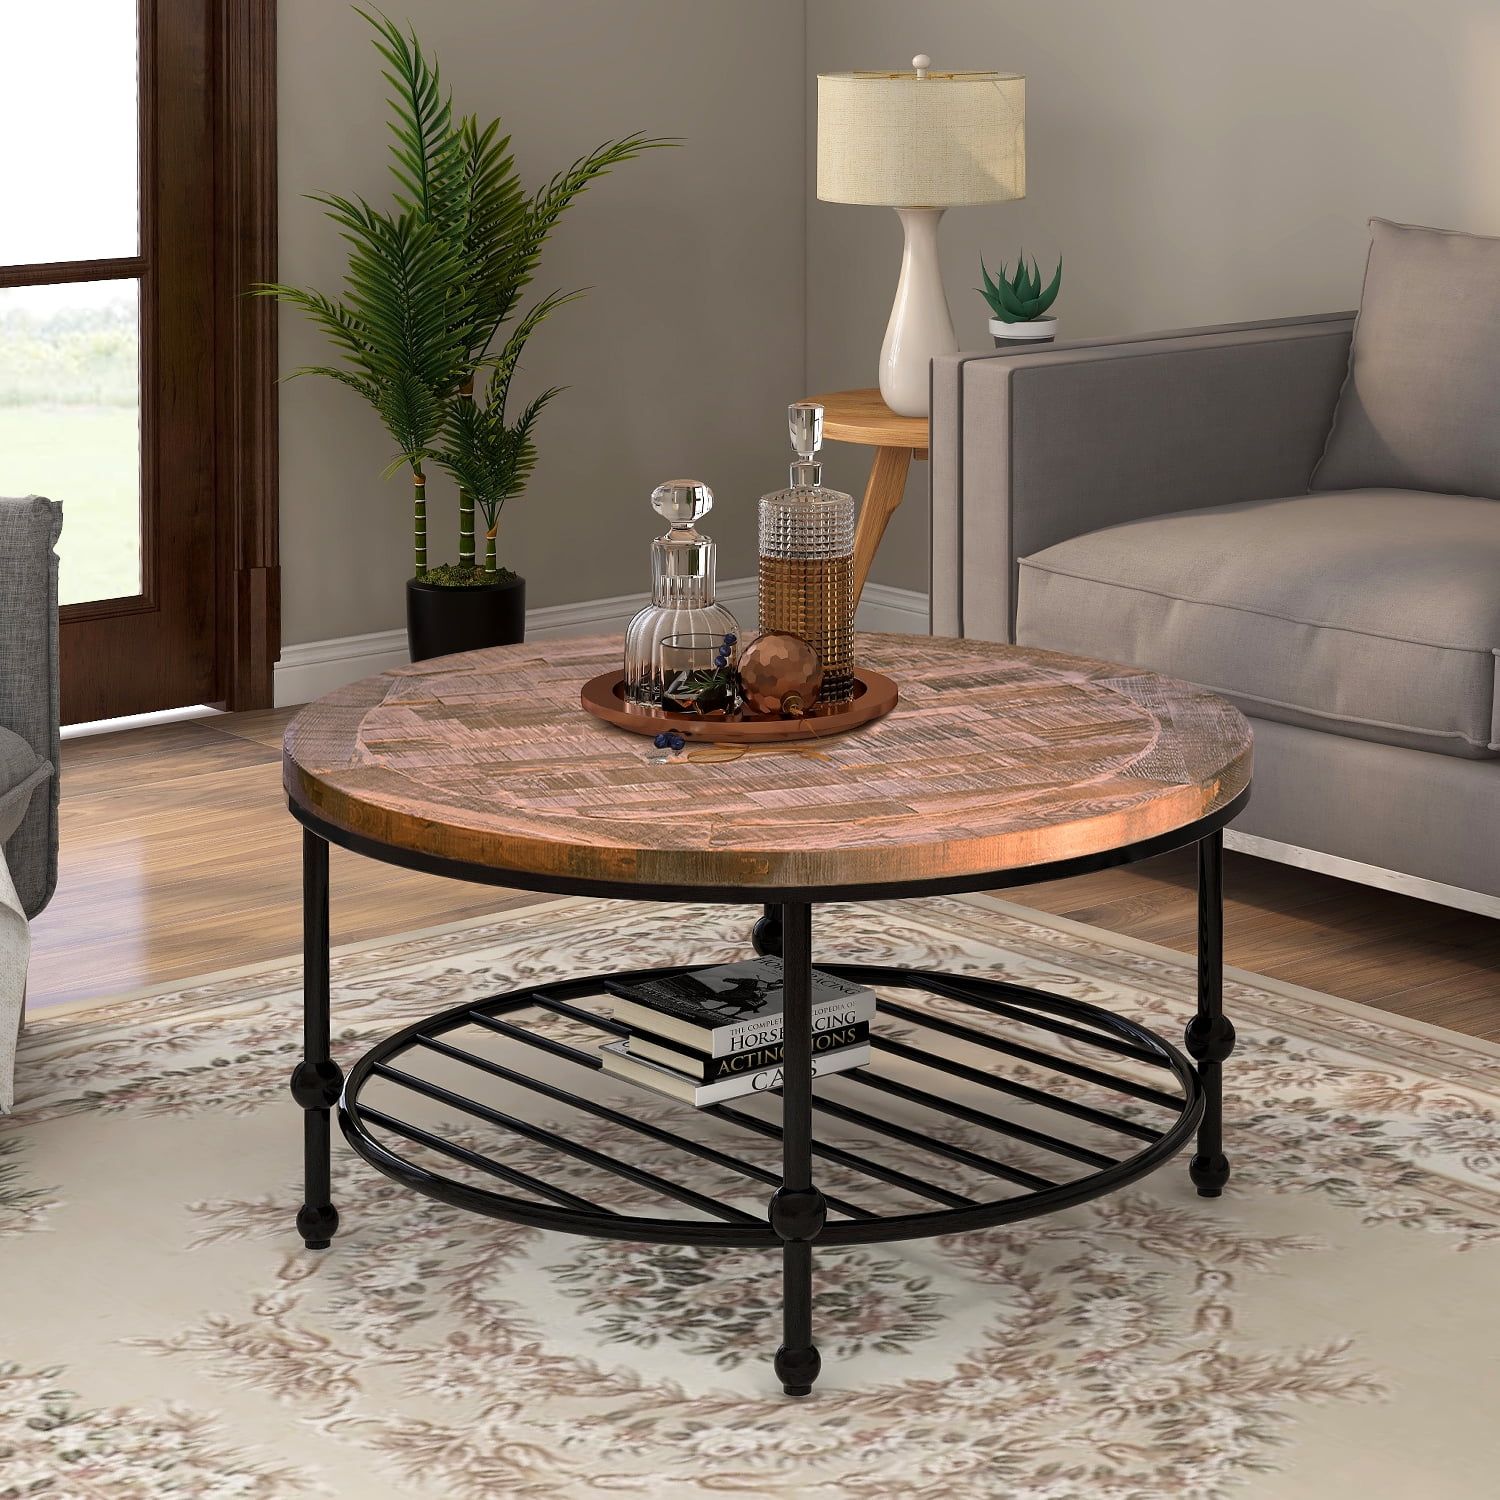 Rustic Natural Round Coffee Table With Storage Shelf For Living Room With Coffee Tables With Round Wooden Tops (Gallery 7 of 20)